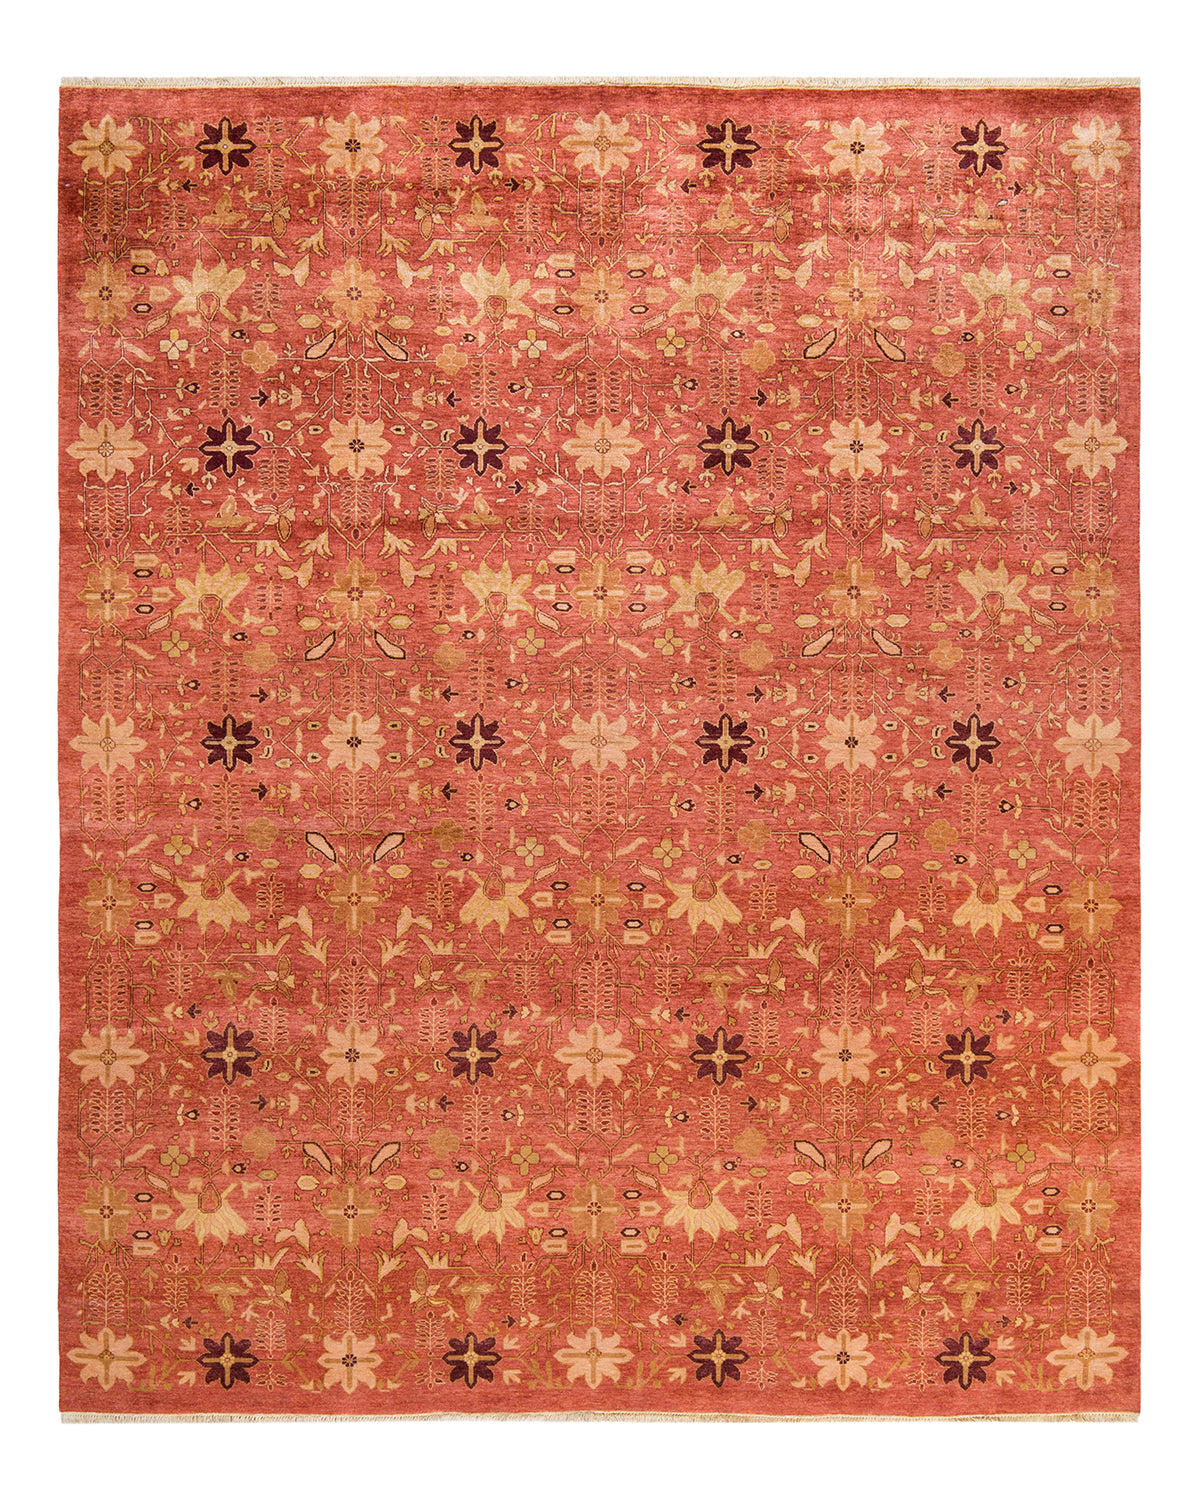 Eclectic, One-of-a-Kind Hand-Knotted Area Rug  - Pink, 7' 10" x 10' 2"